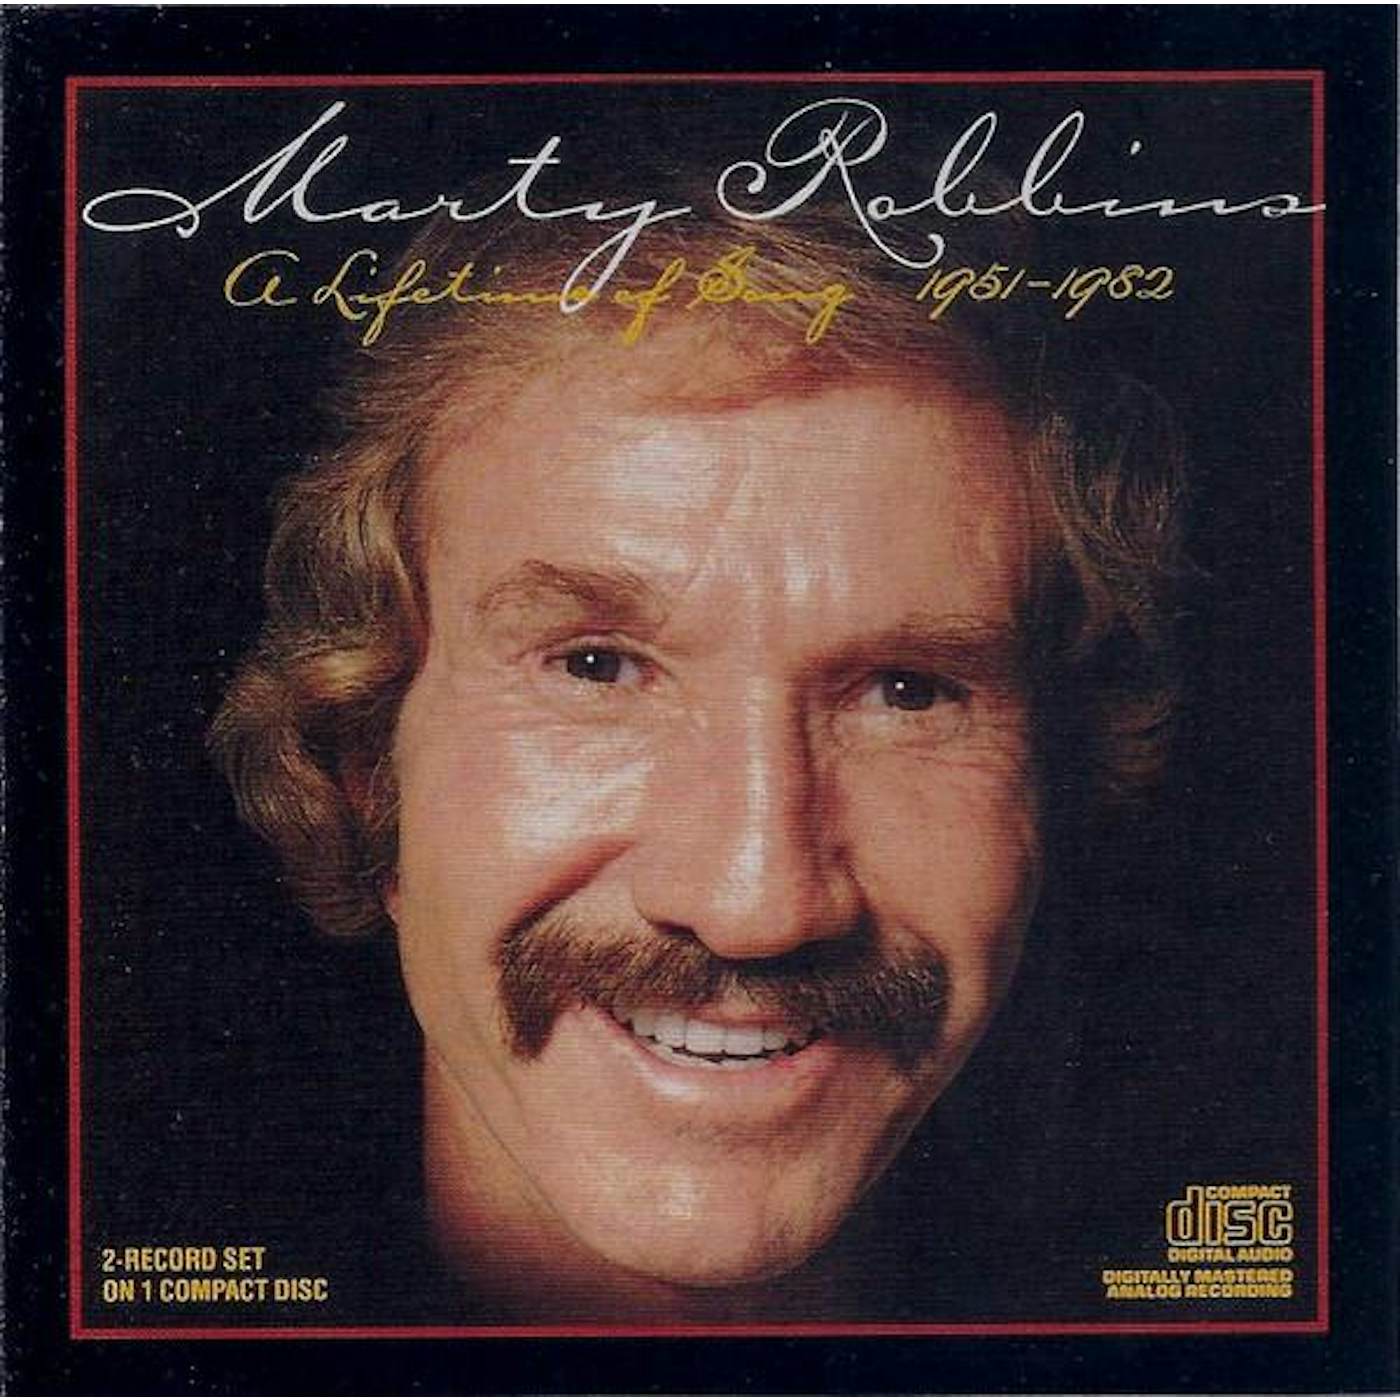 Marty Robbins LIFETIME OF SONG 1951 - 1982 CD